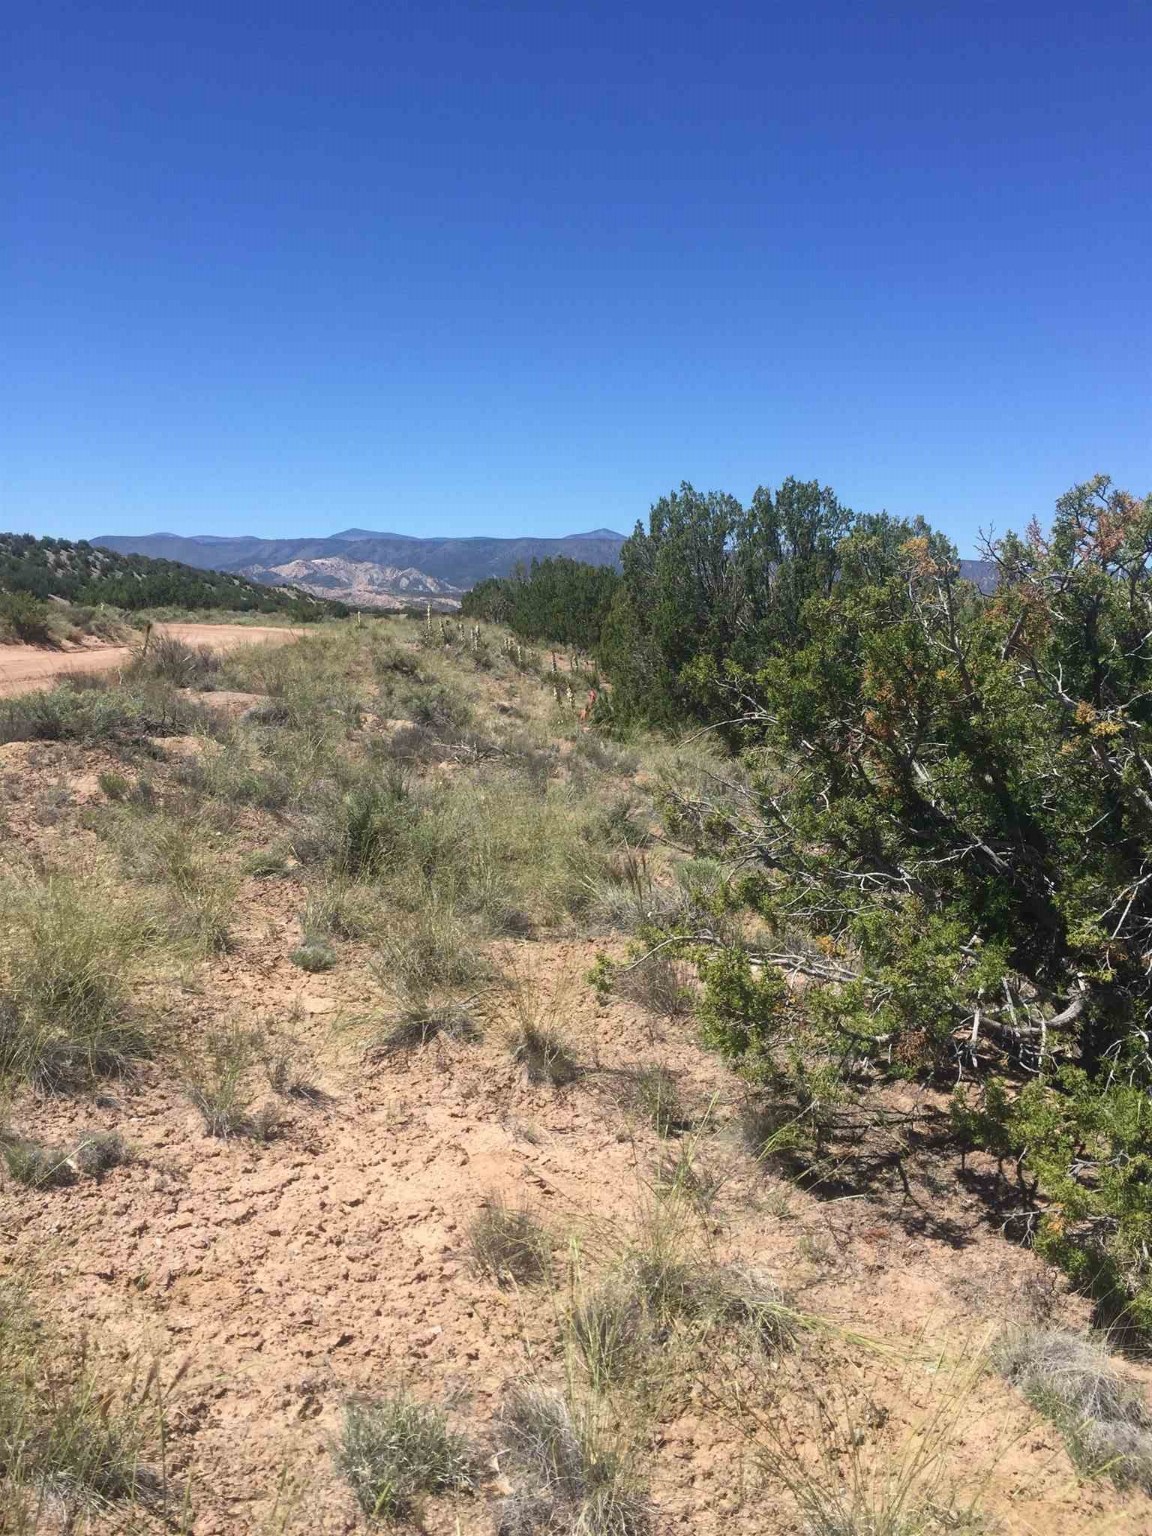 Lots 8, 9, 23&24 Fort Defina, Abiquiu, New Mexico 87510, ,Land,For Sale,Lots 8,9,23&24 Fort Defina,201902367